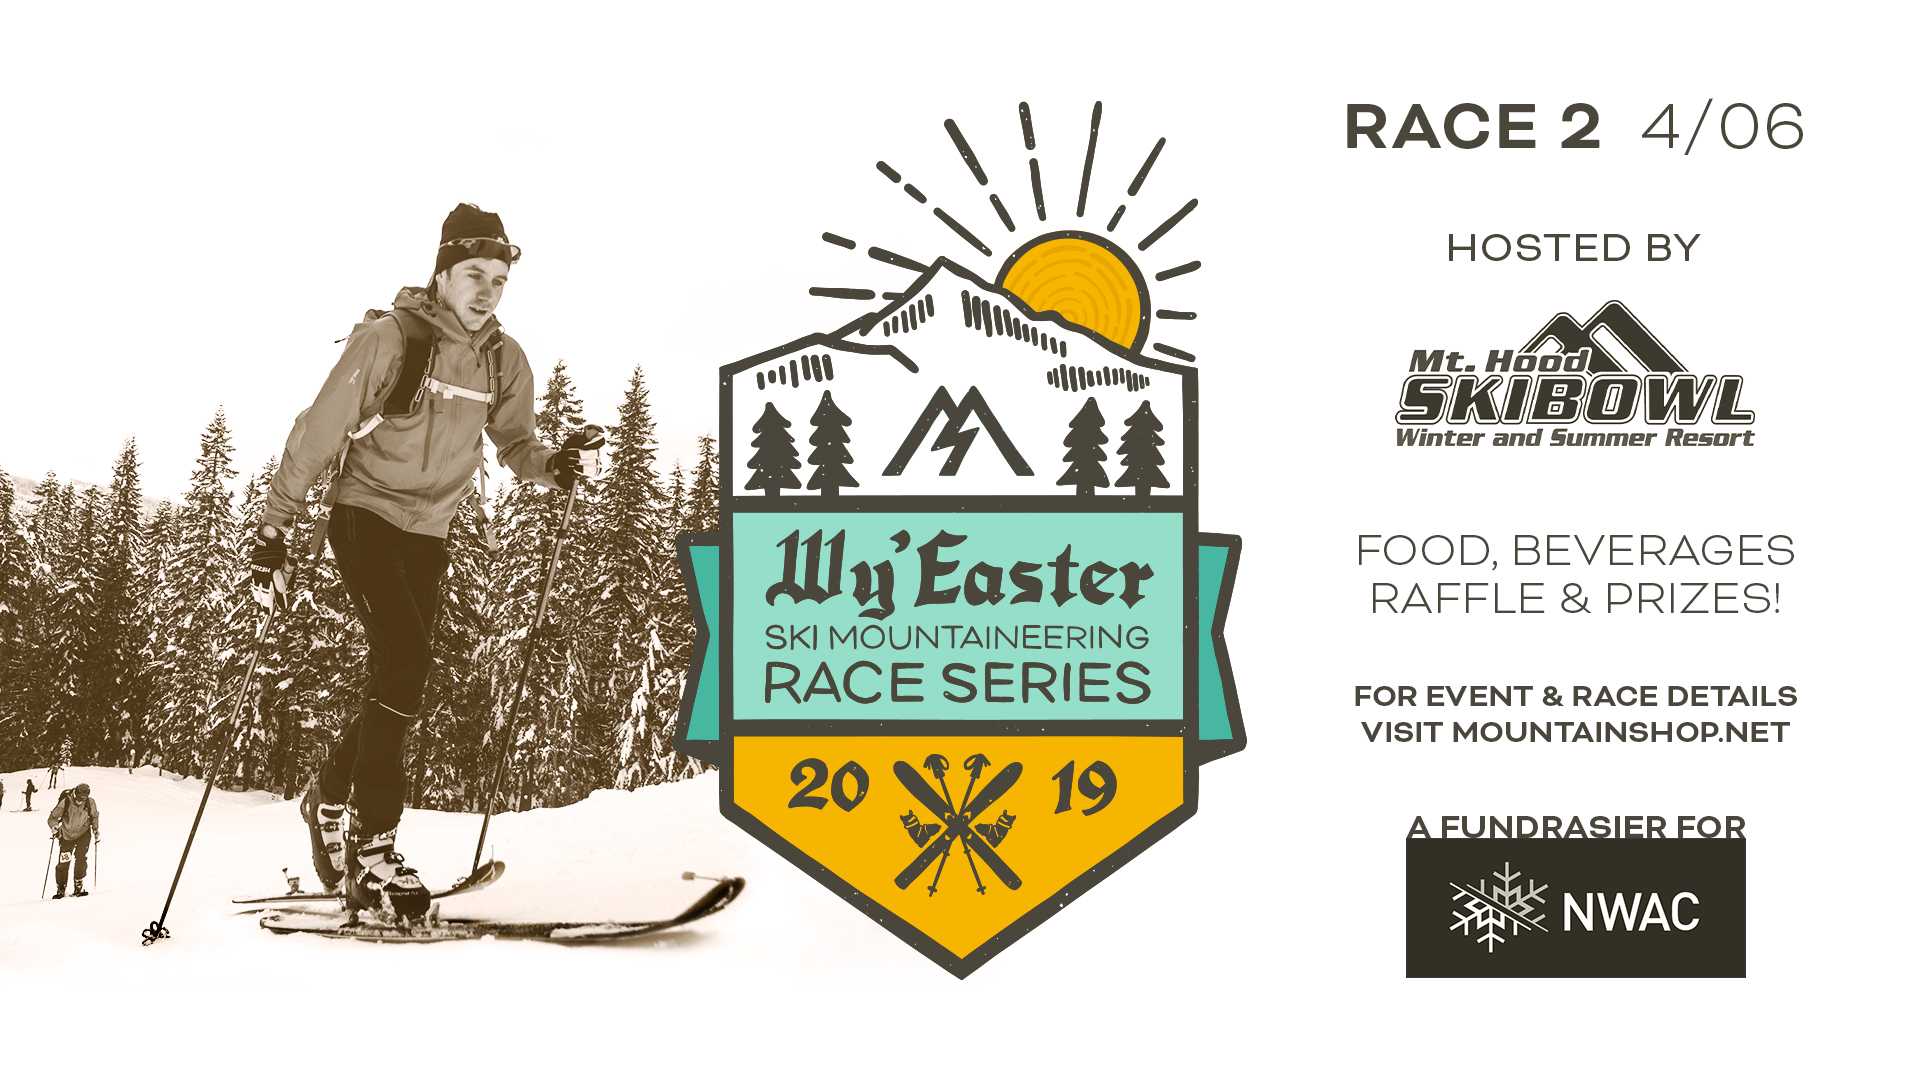 Wy'Easter Ski Mountaineering Race #2 at Skibowl